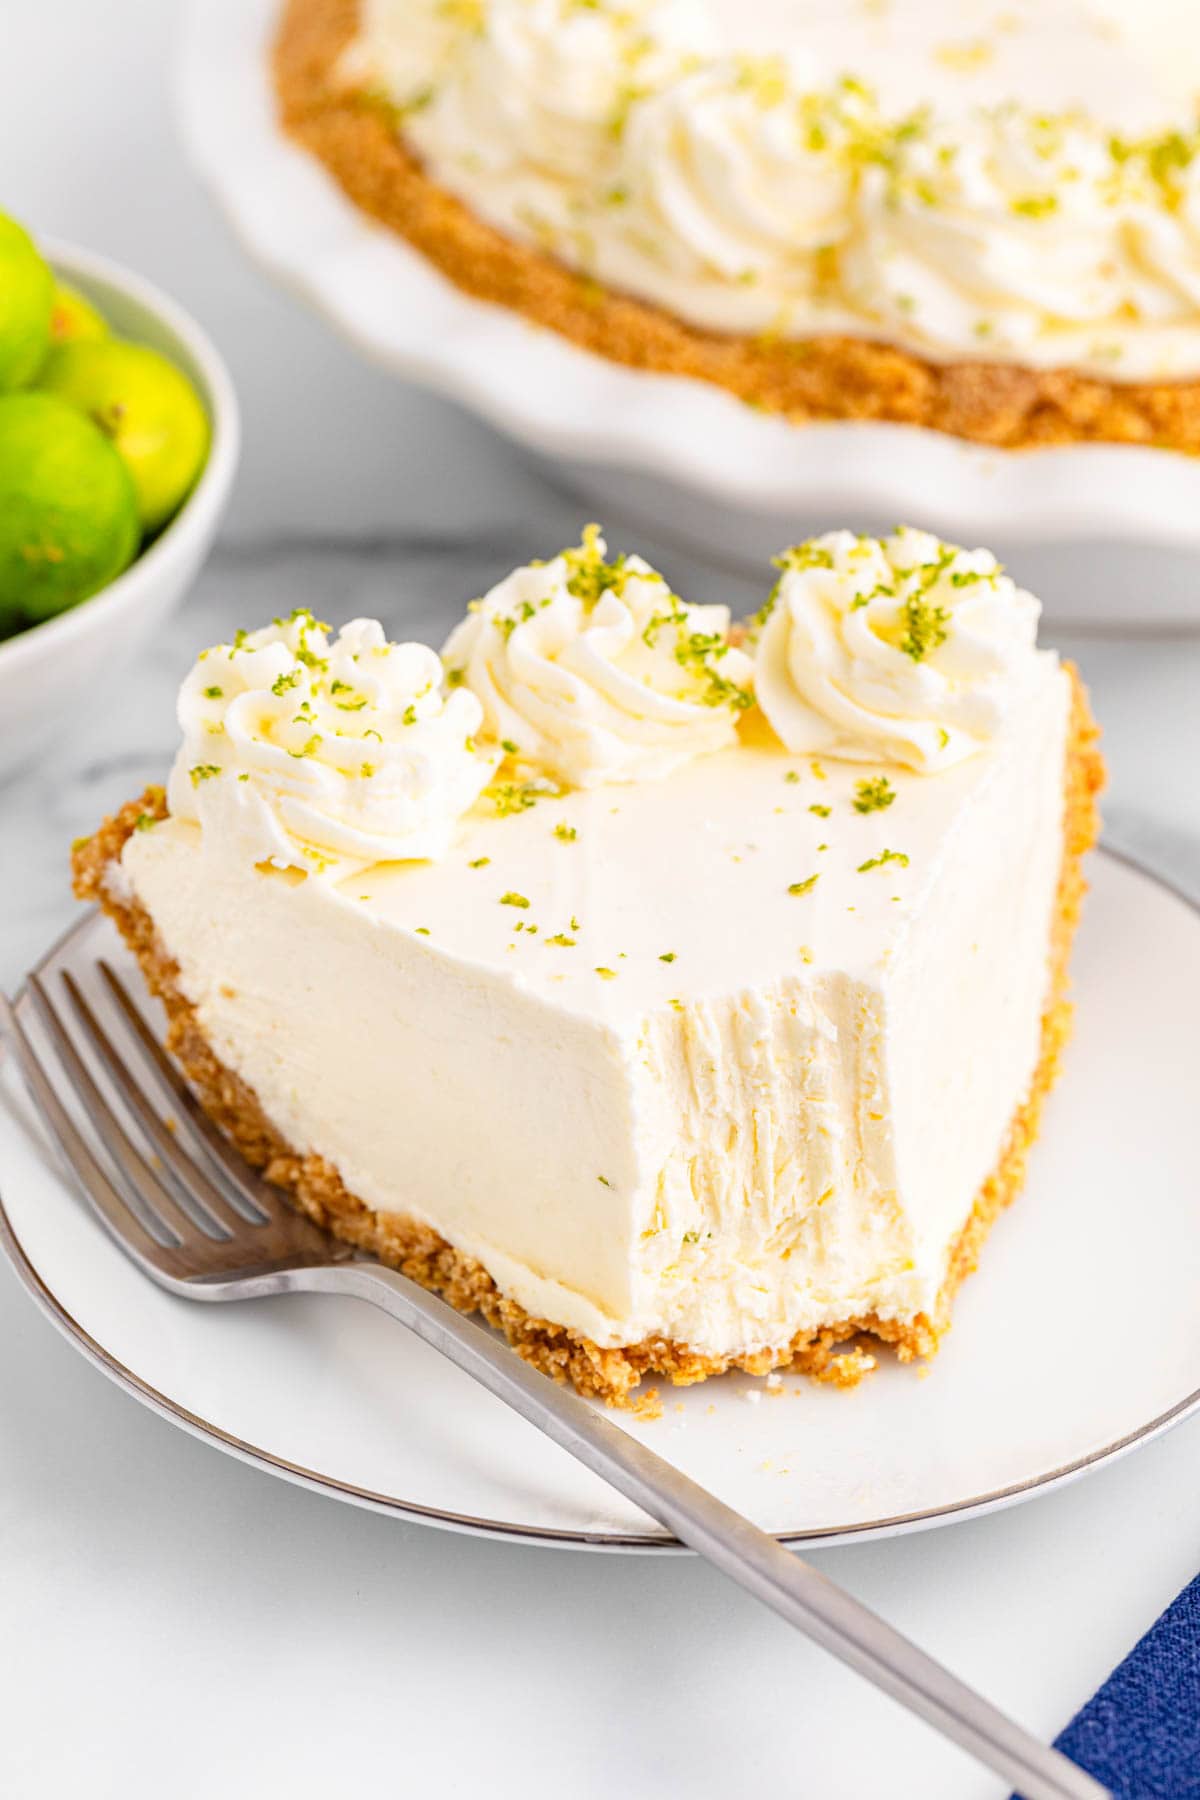 Key lime pie with a piece bitten off